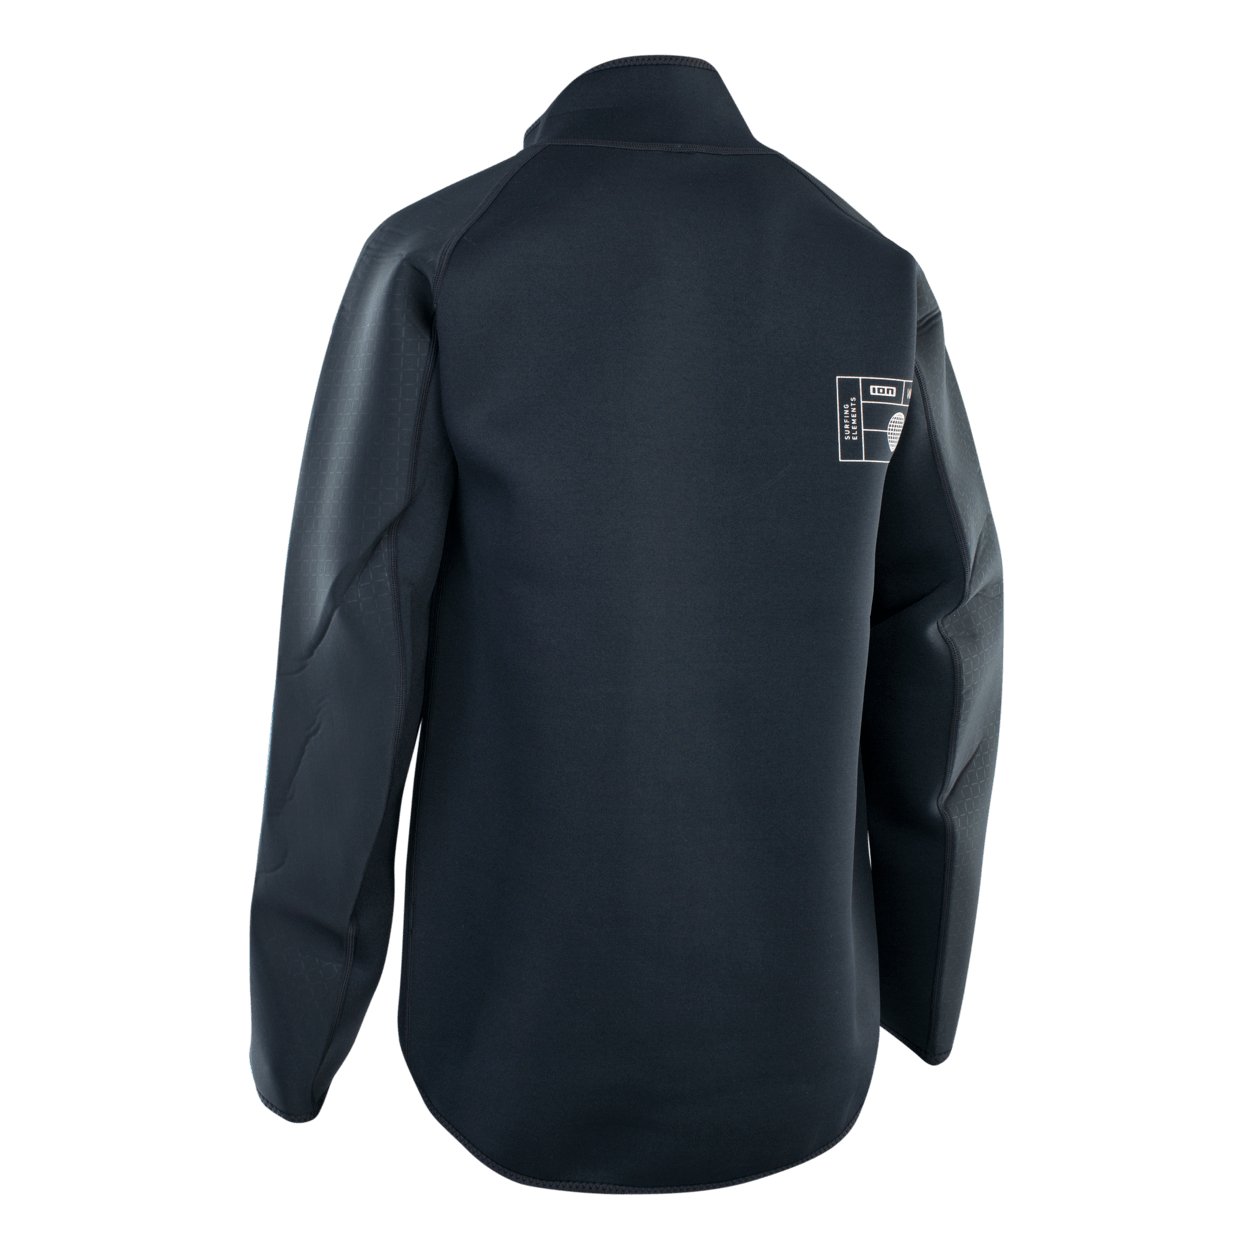 ION Men Neo Cruise Jacket 2023 - Worthing Watersports - 9010583052830 - Tops - ION Water